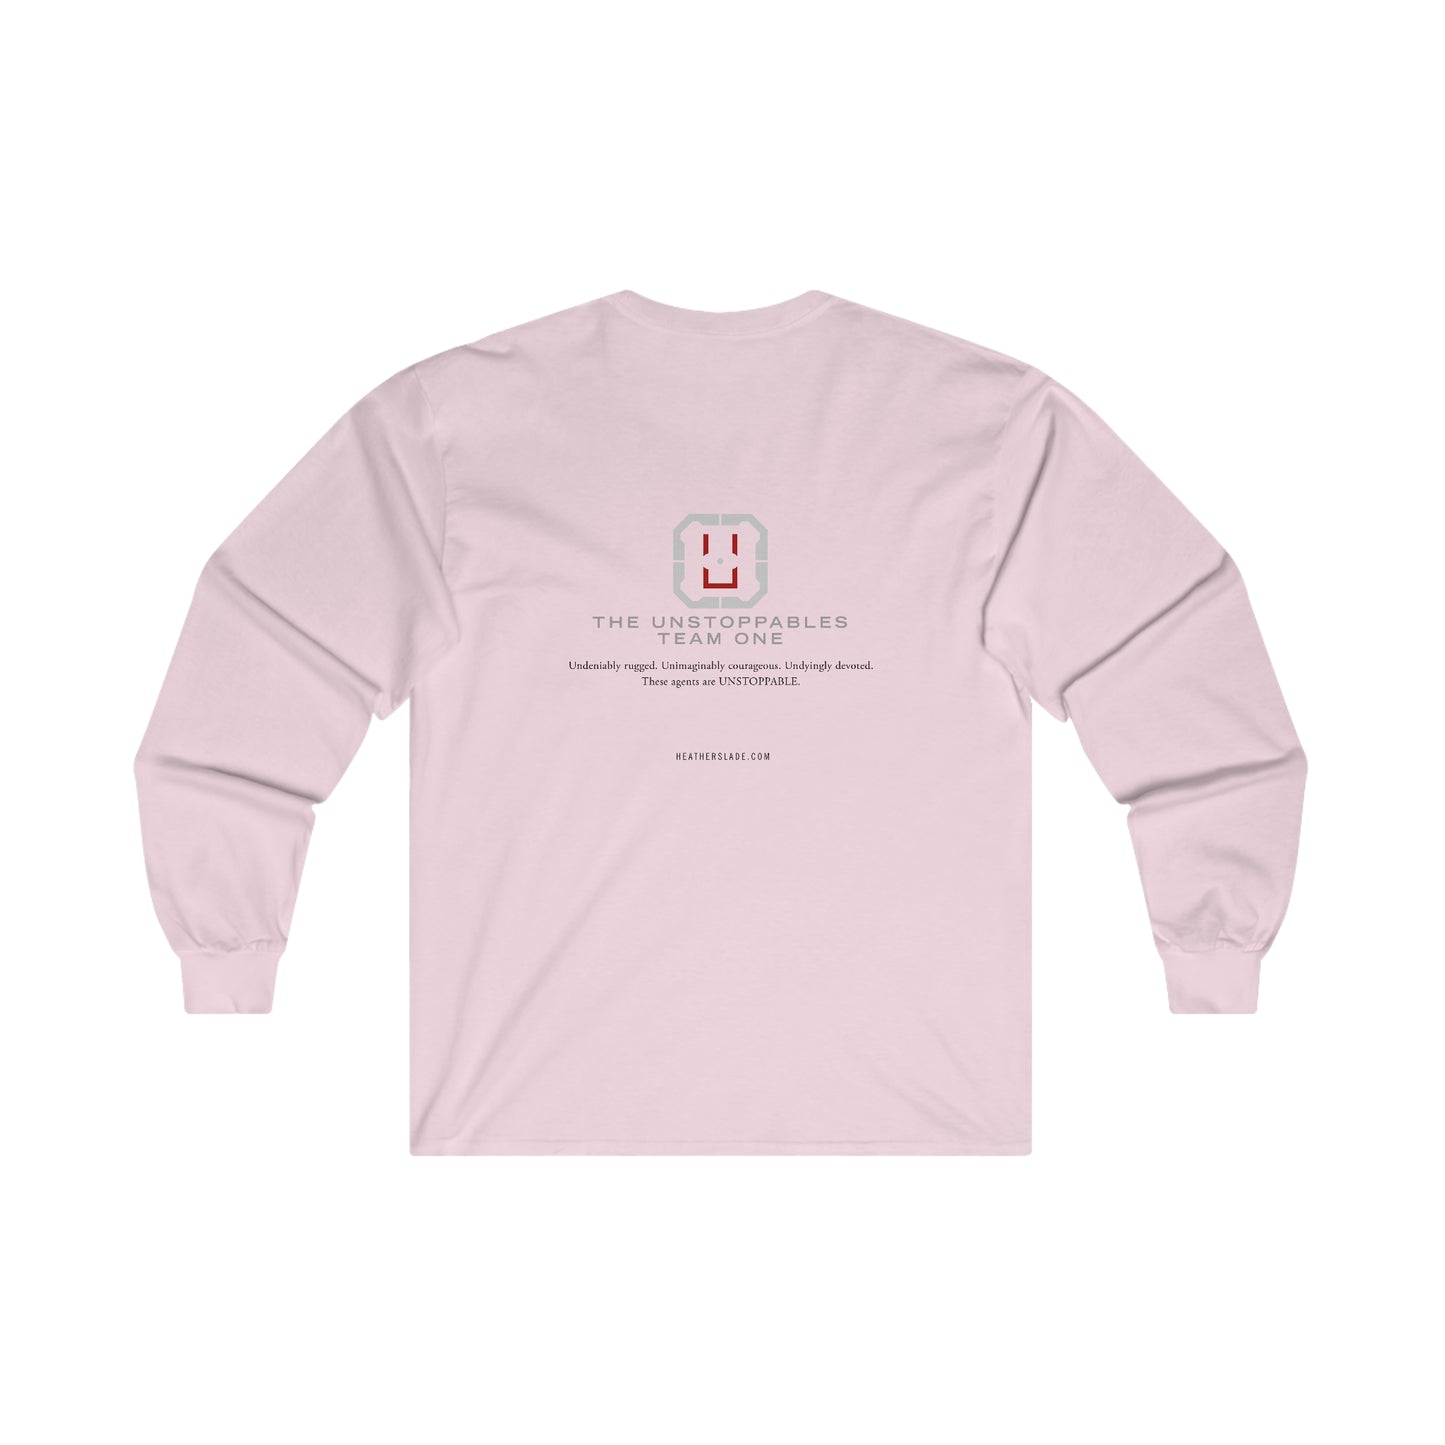 The Unstoppables Team One Ultra Cotton Long Sleeve Tee